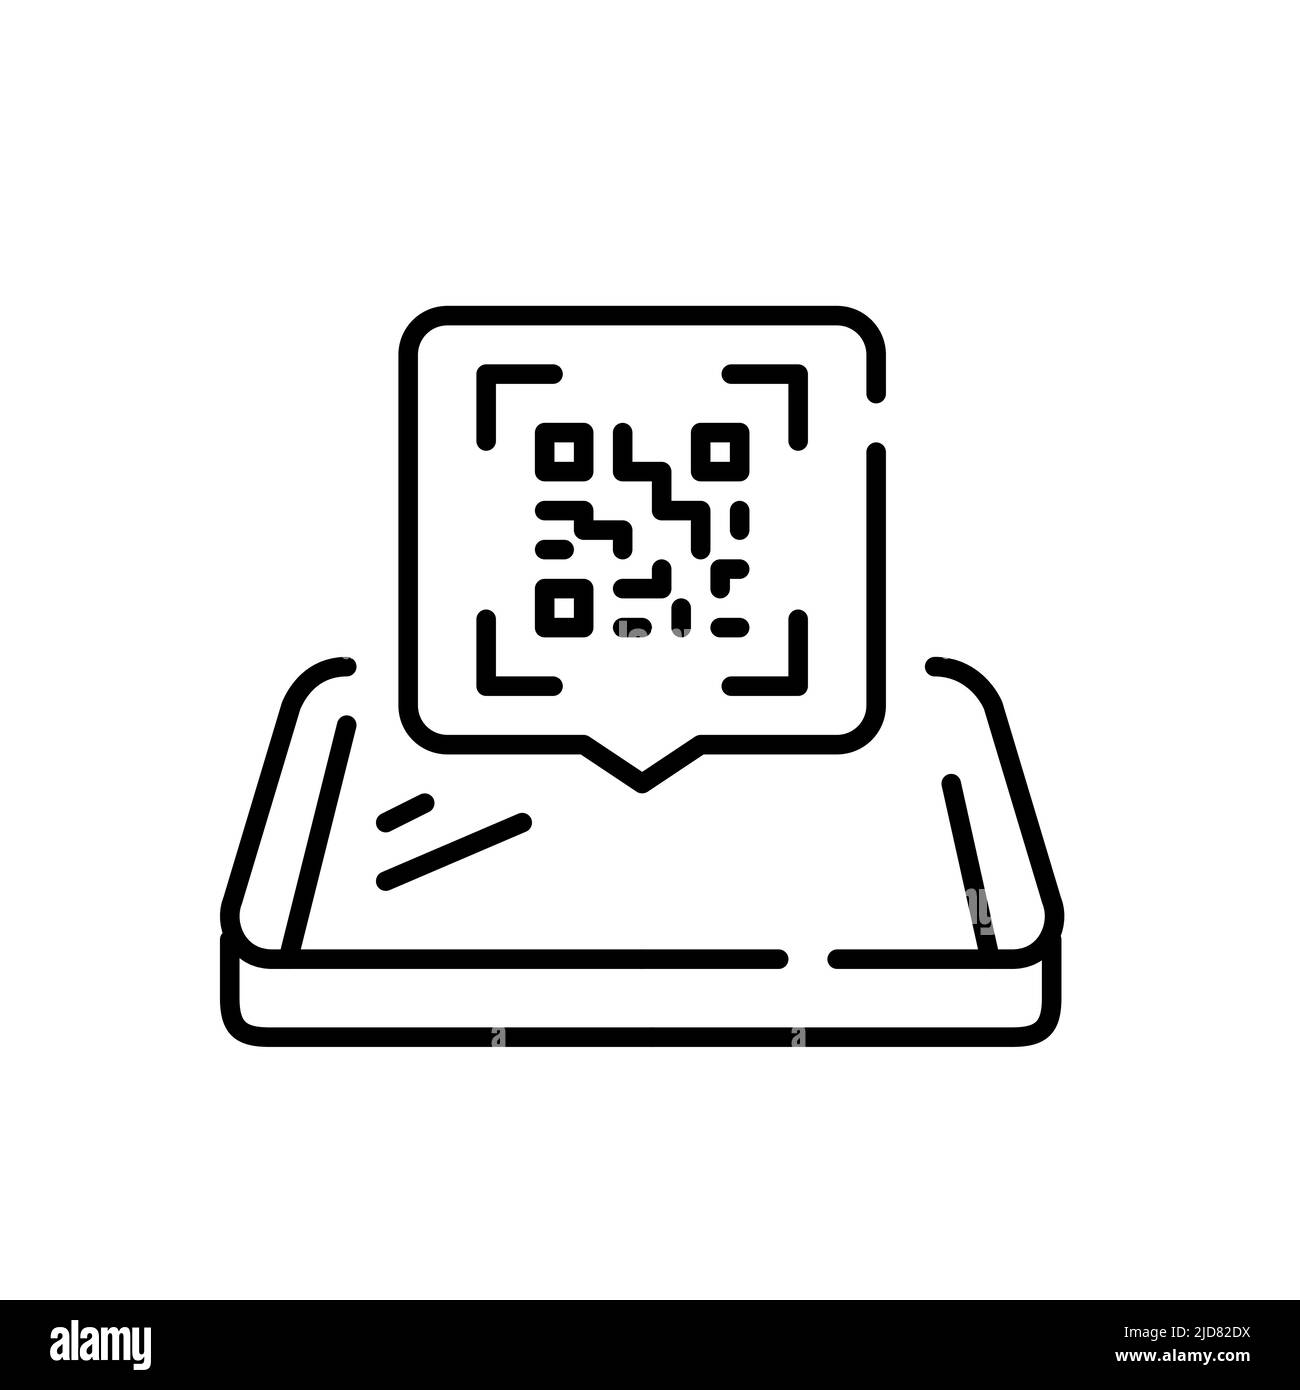 Scan a qr code message on an isometric smartphone. Pixel perfect, editable stroke line icon Stock Vector